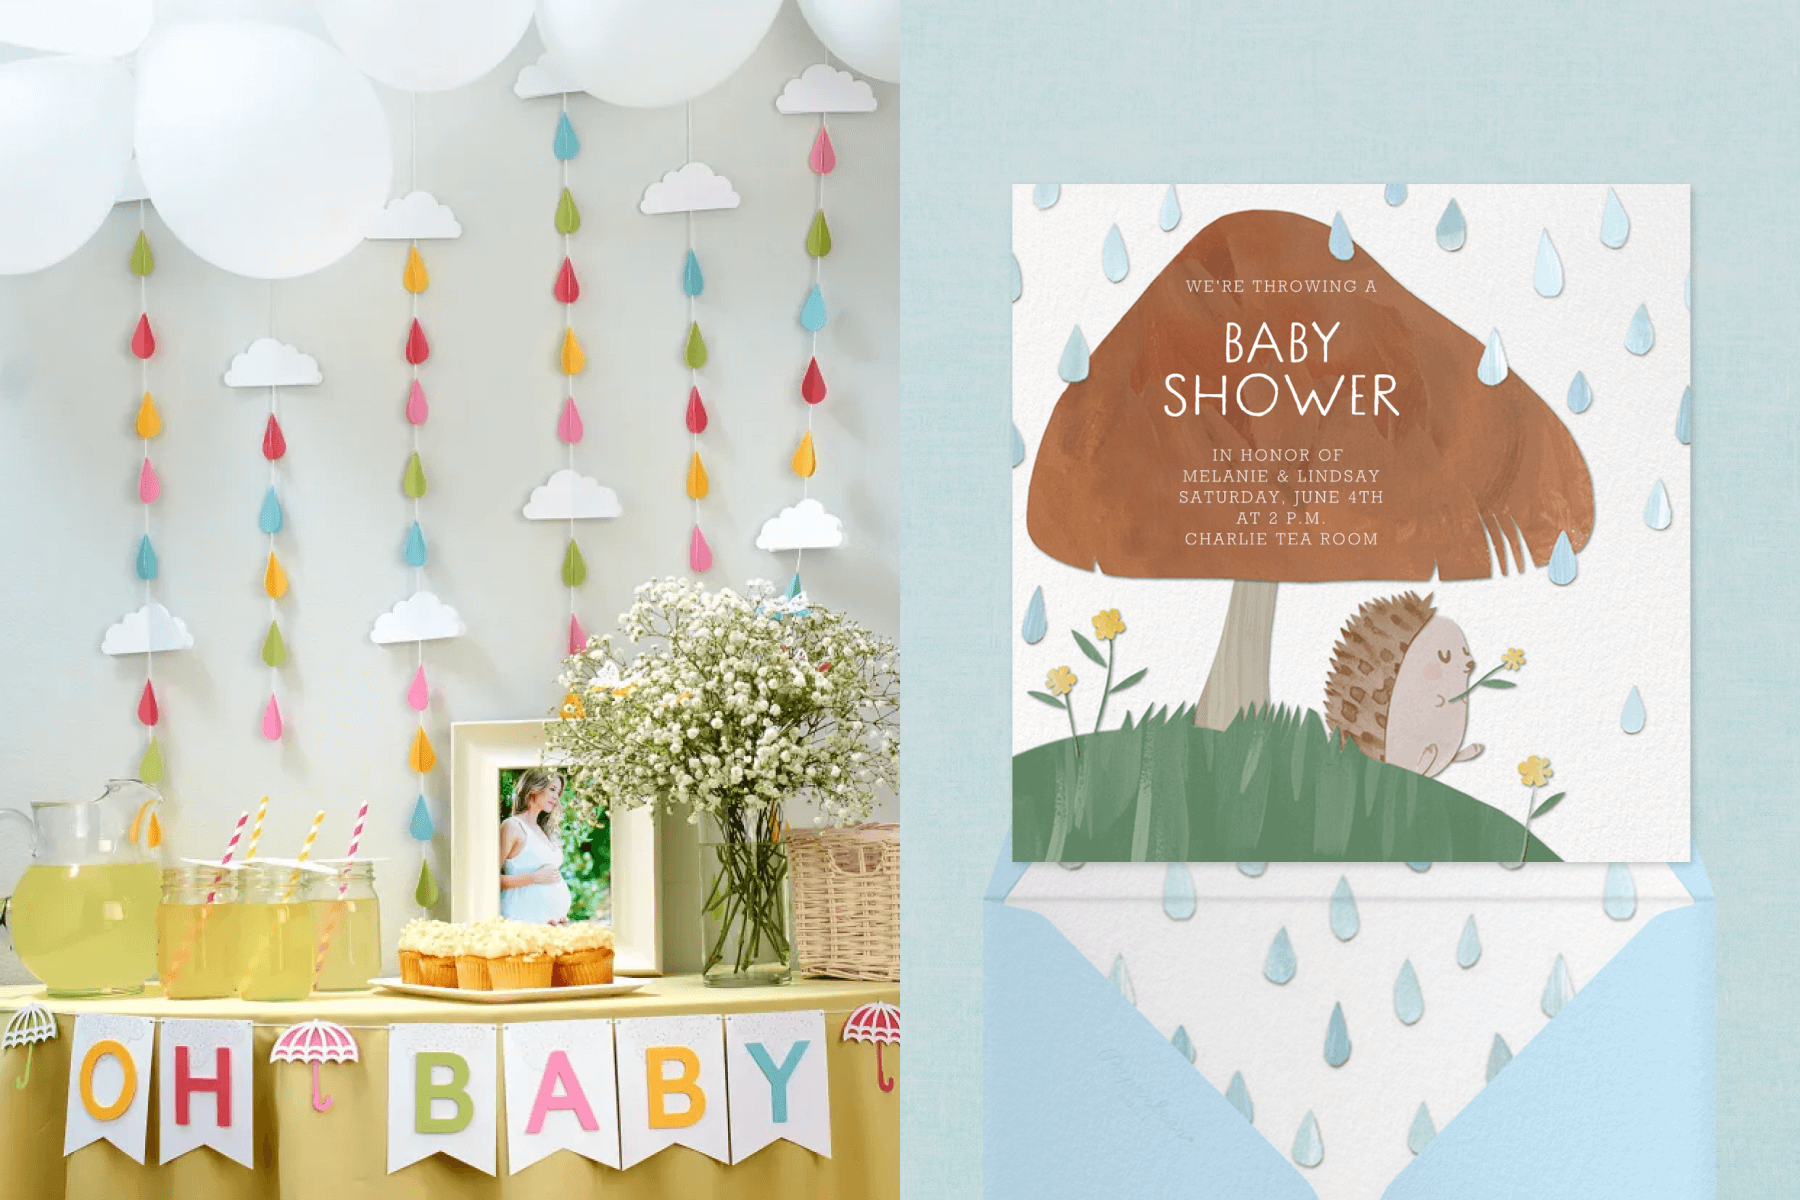 6 Adorable floral themed baby shower ideas